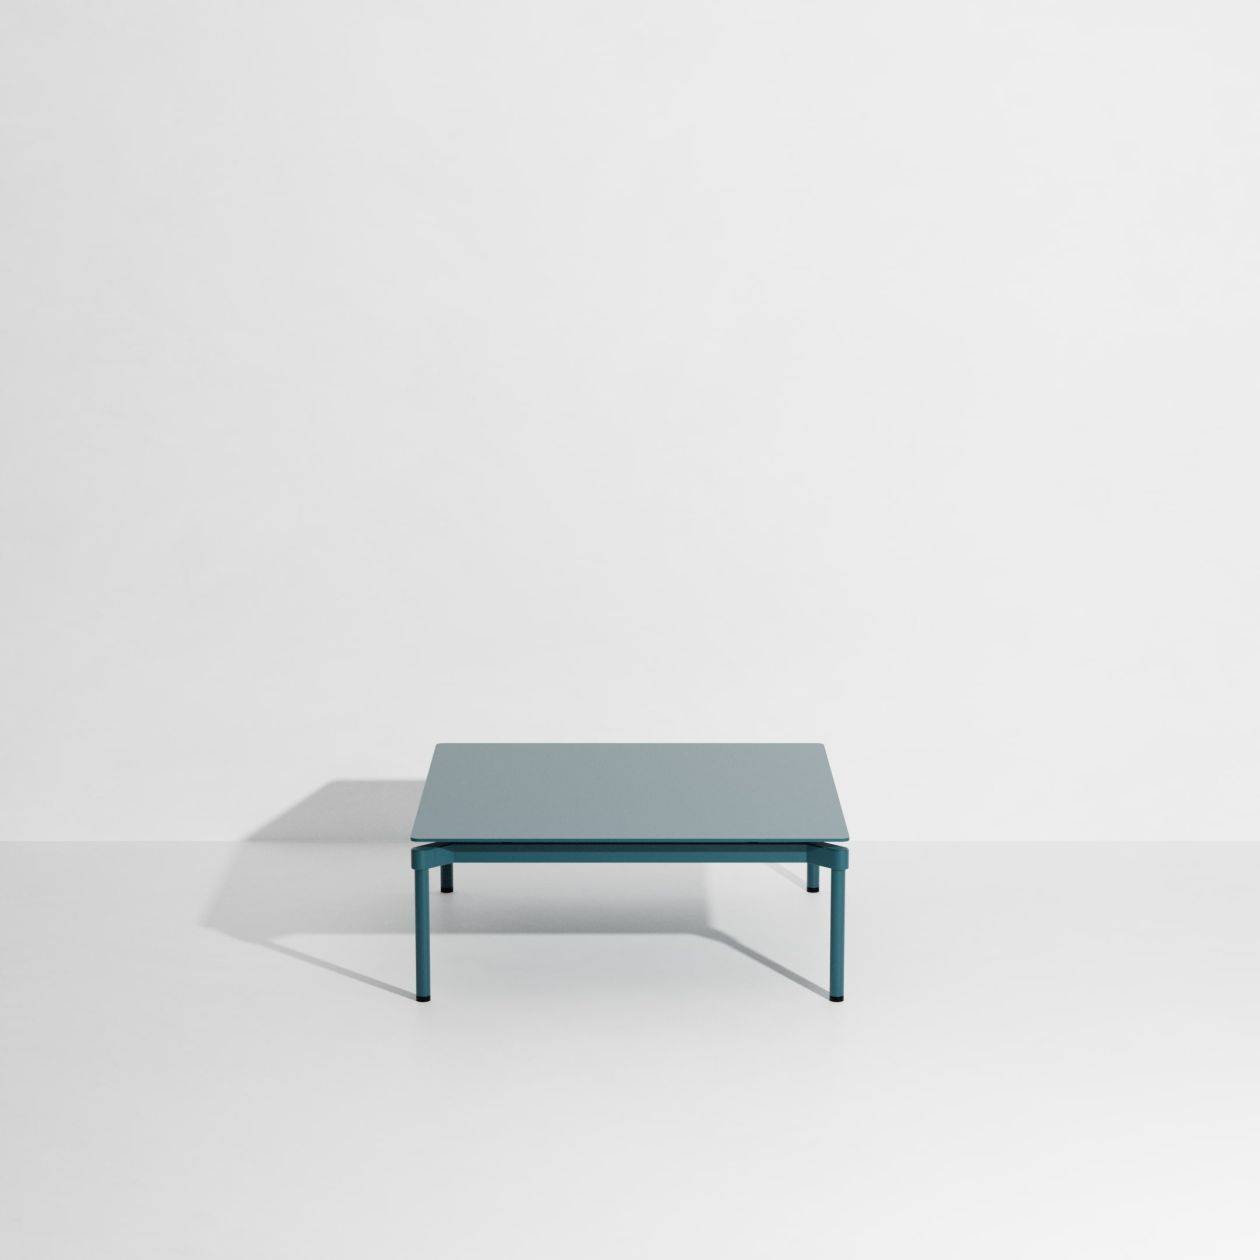 Fromme Coffee Table - Ocean blue